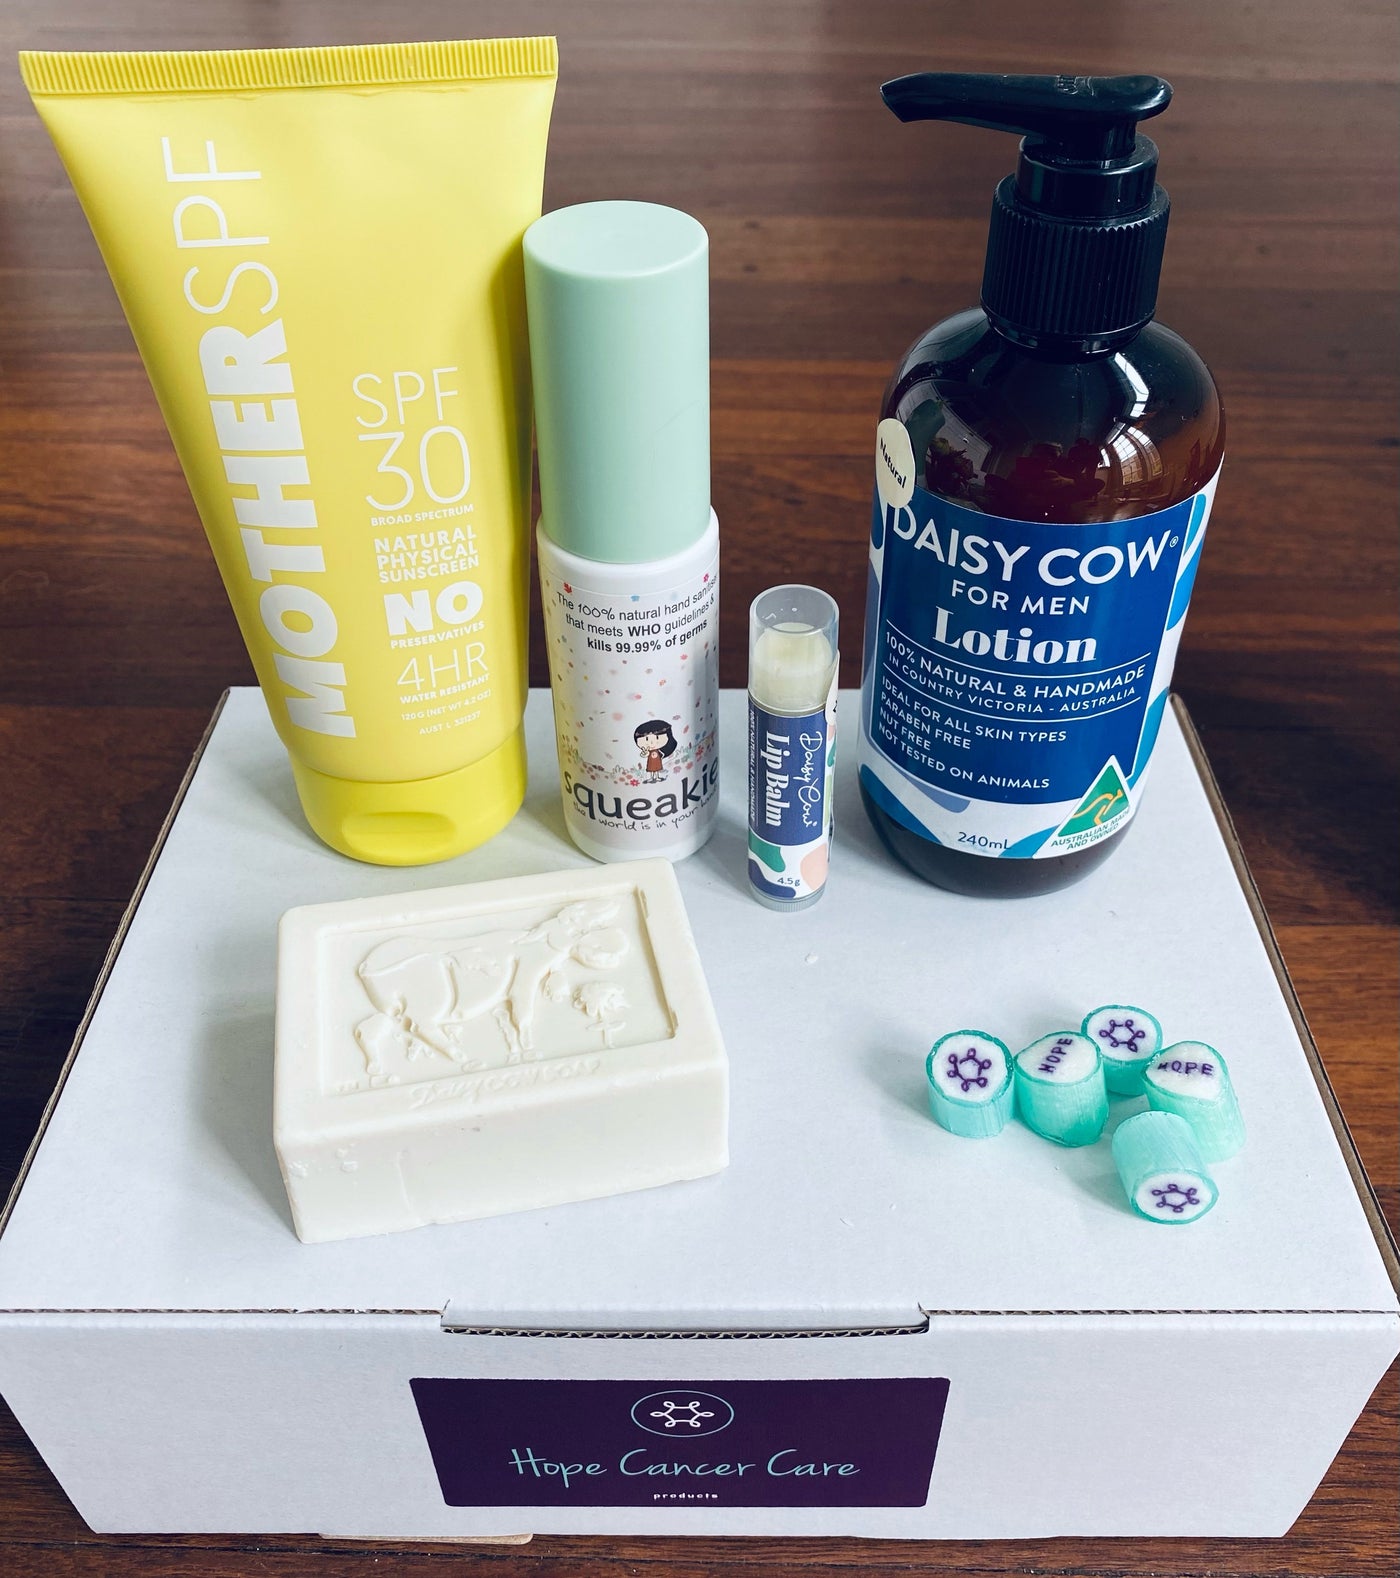 The HOPE Essentials Skin Care Pack